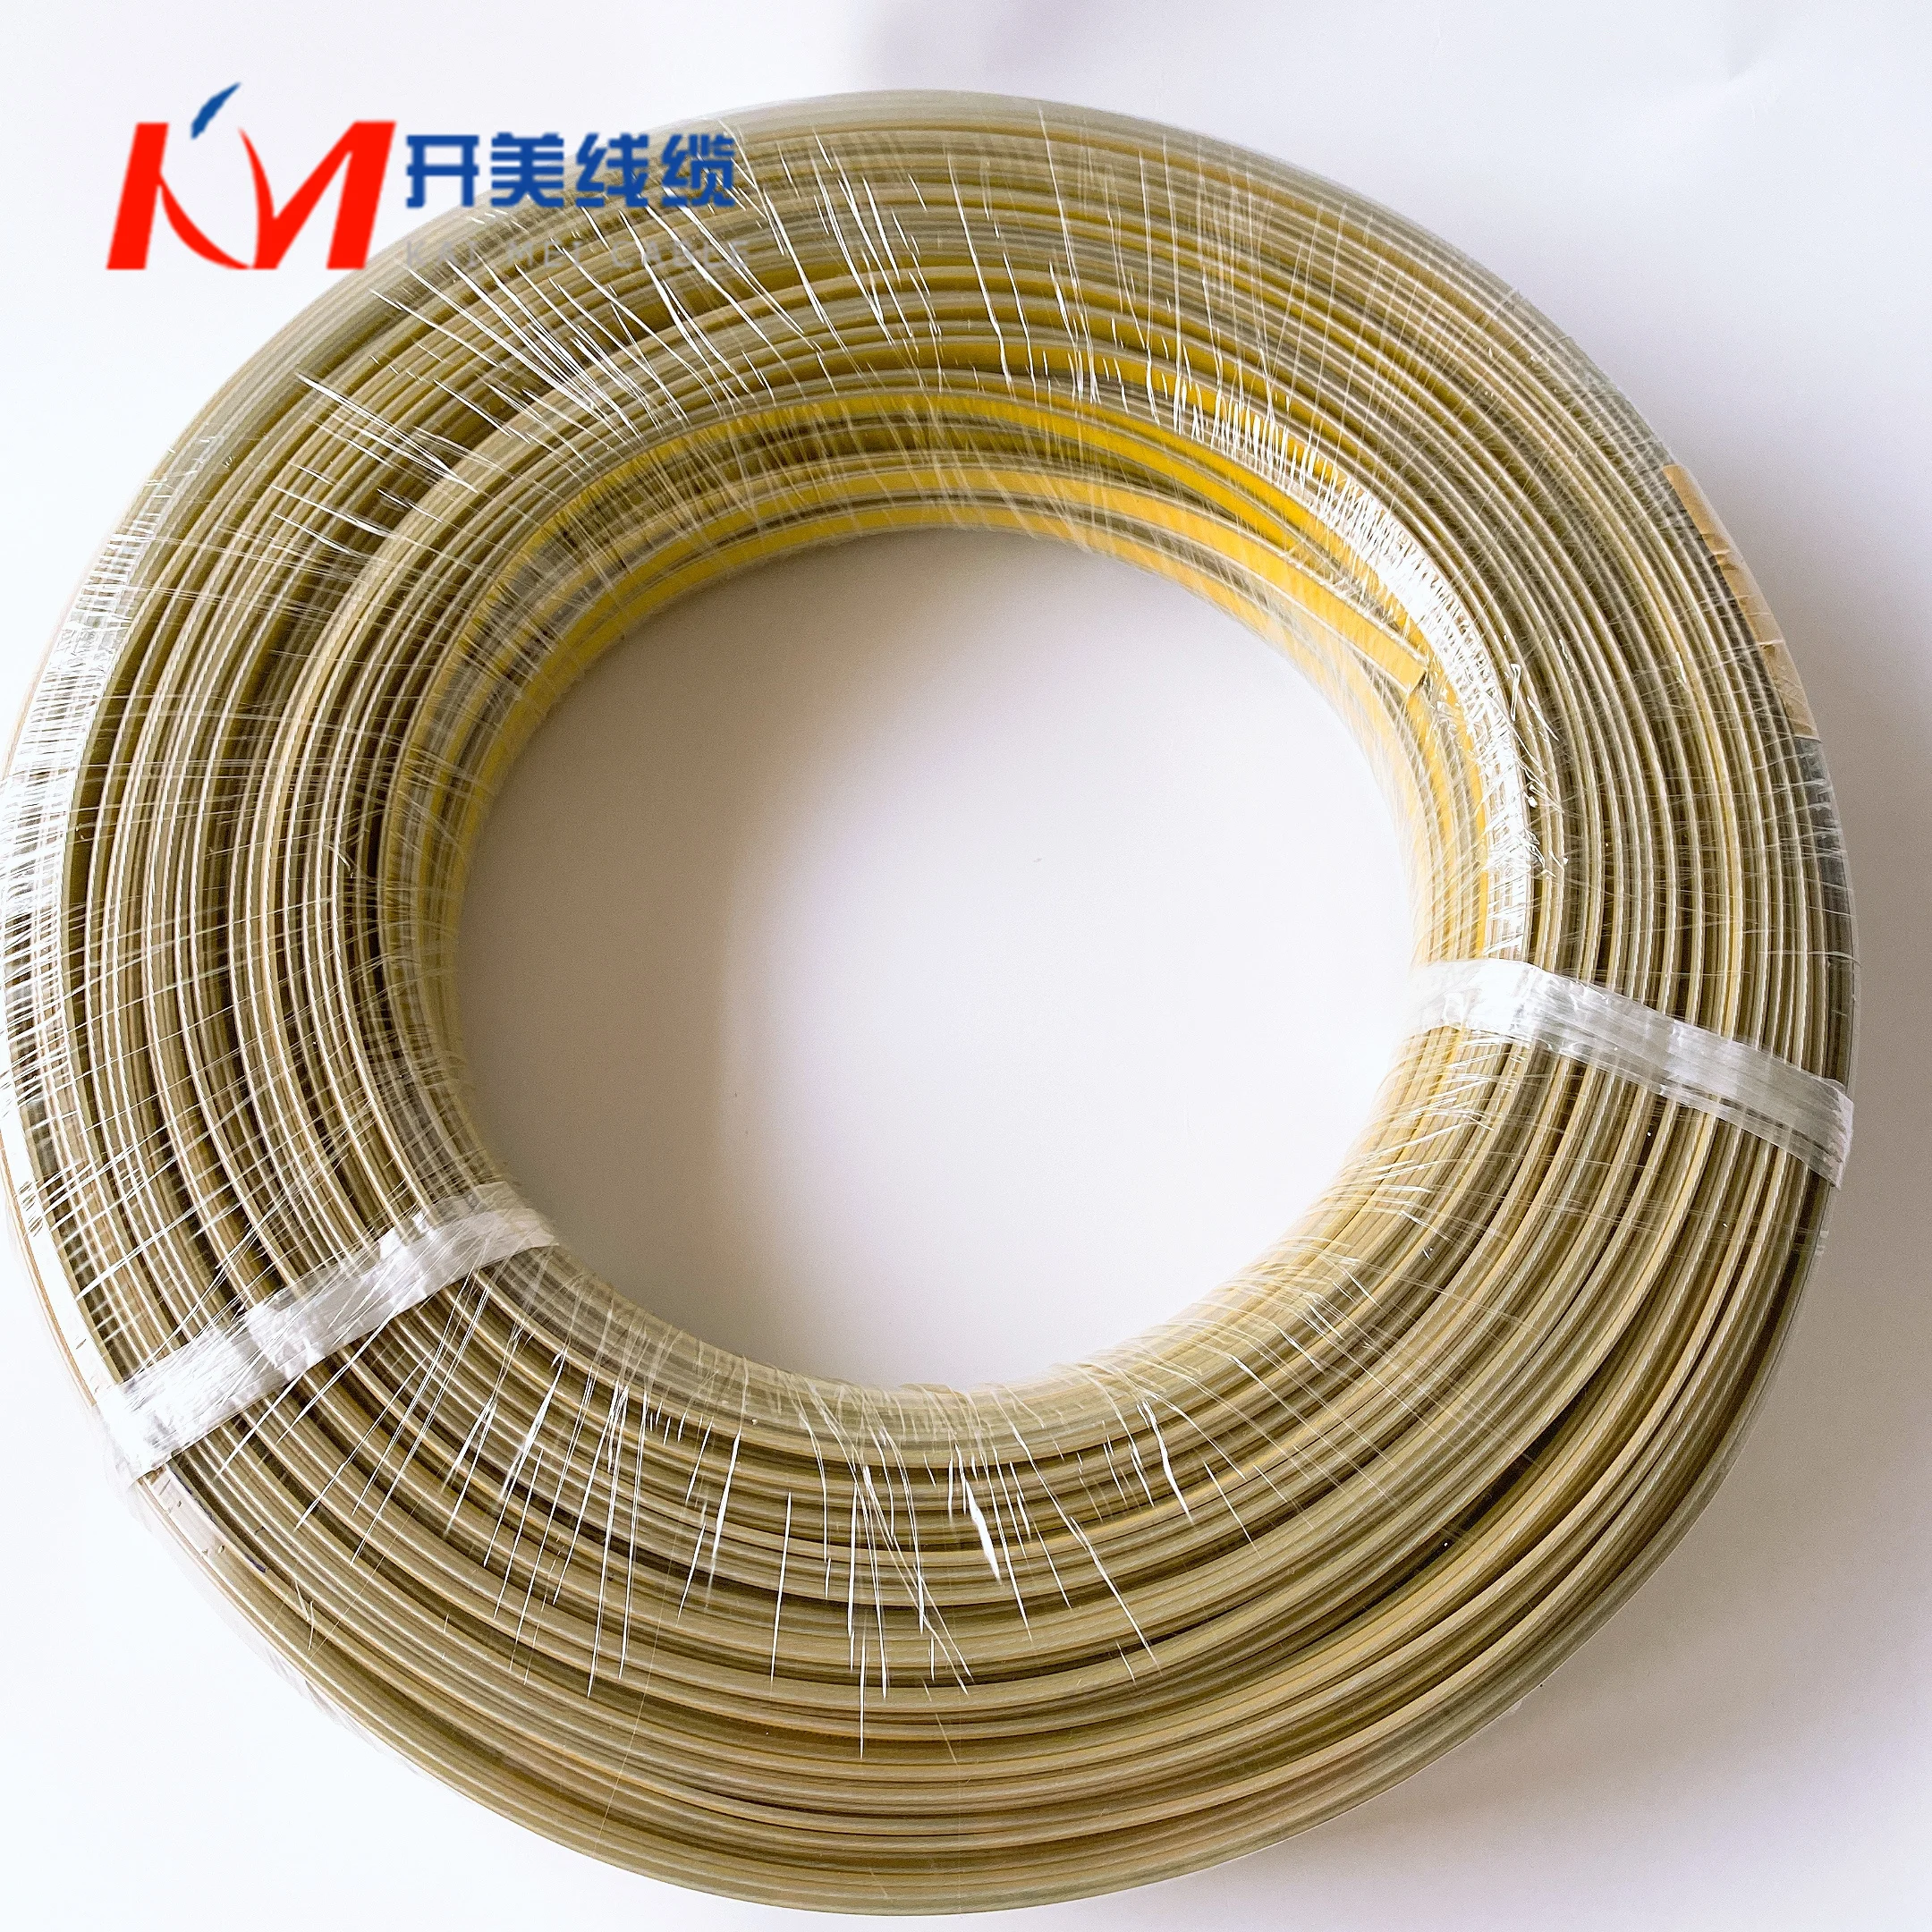 Oil Strip cable. Steel tape cable